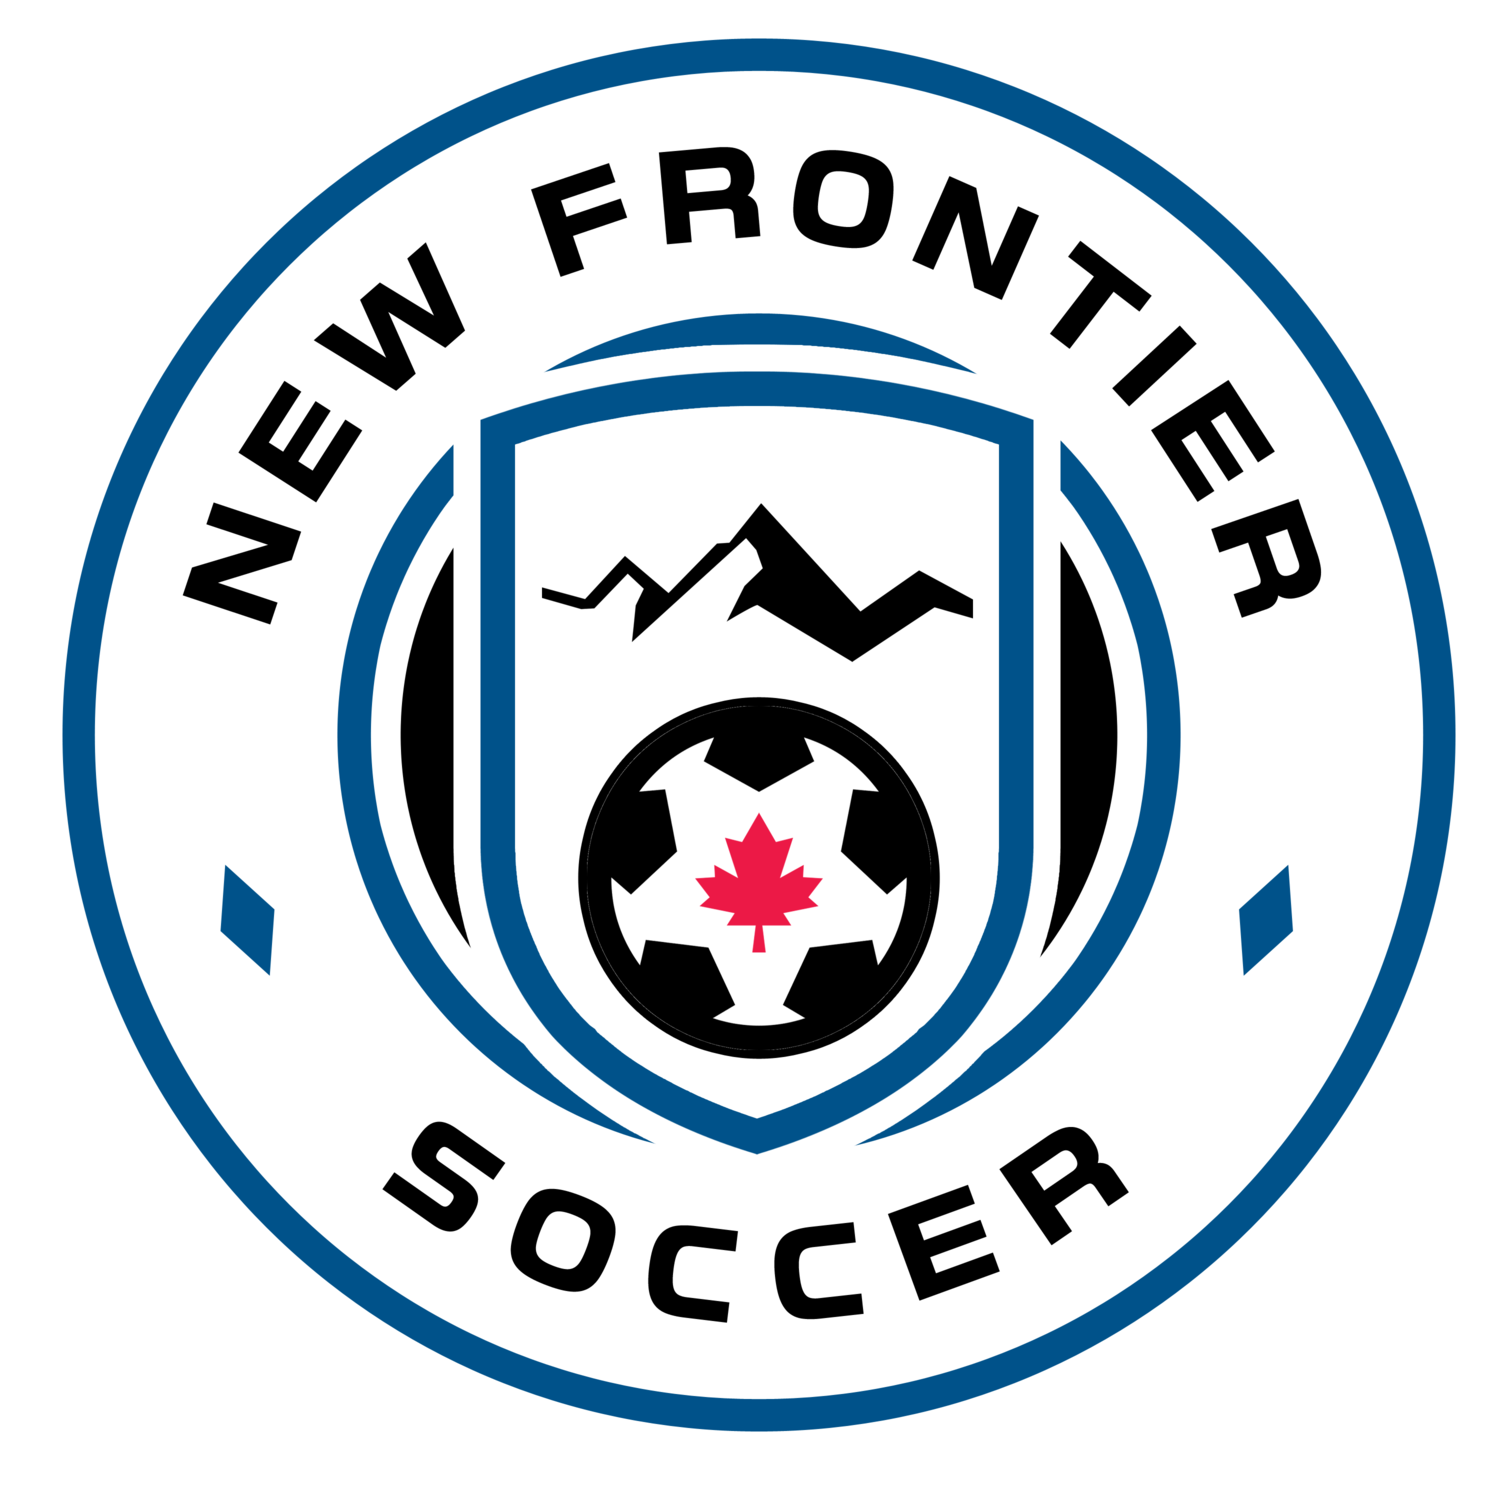 New Frontier Soccer Club